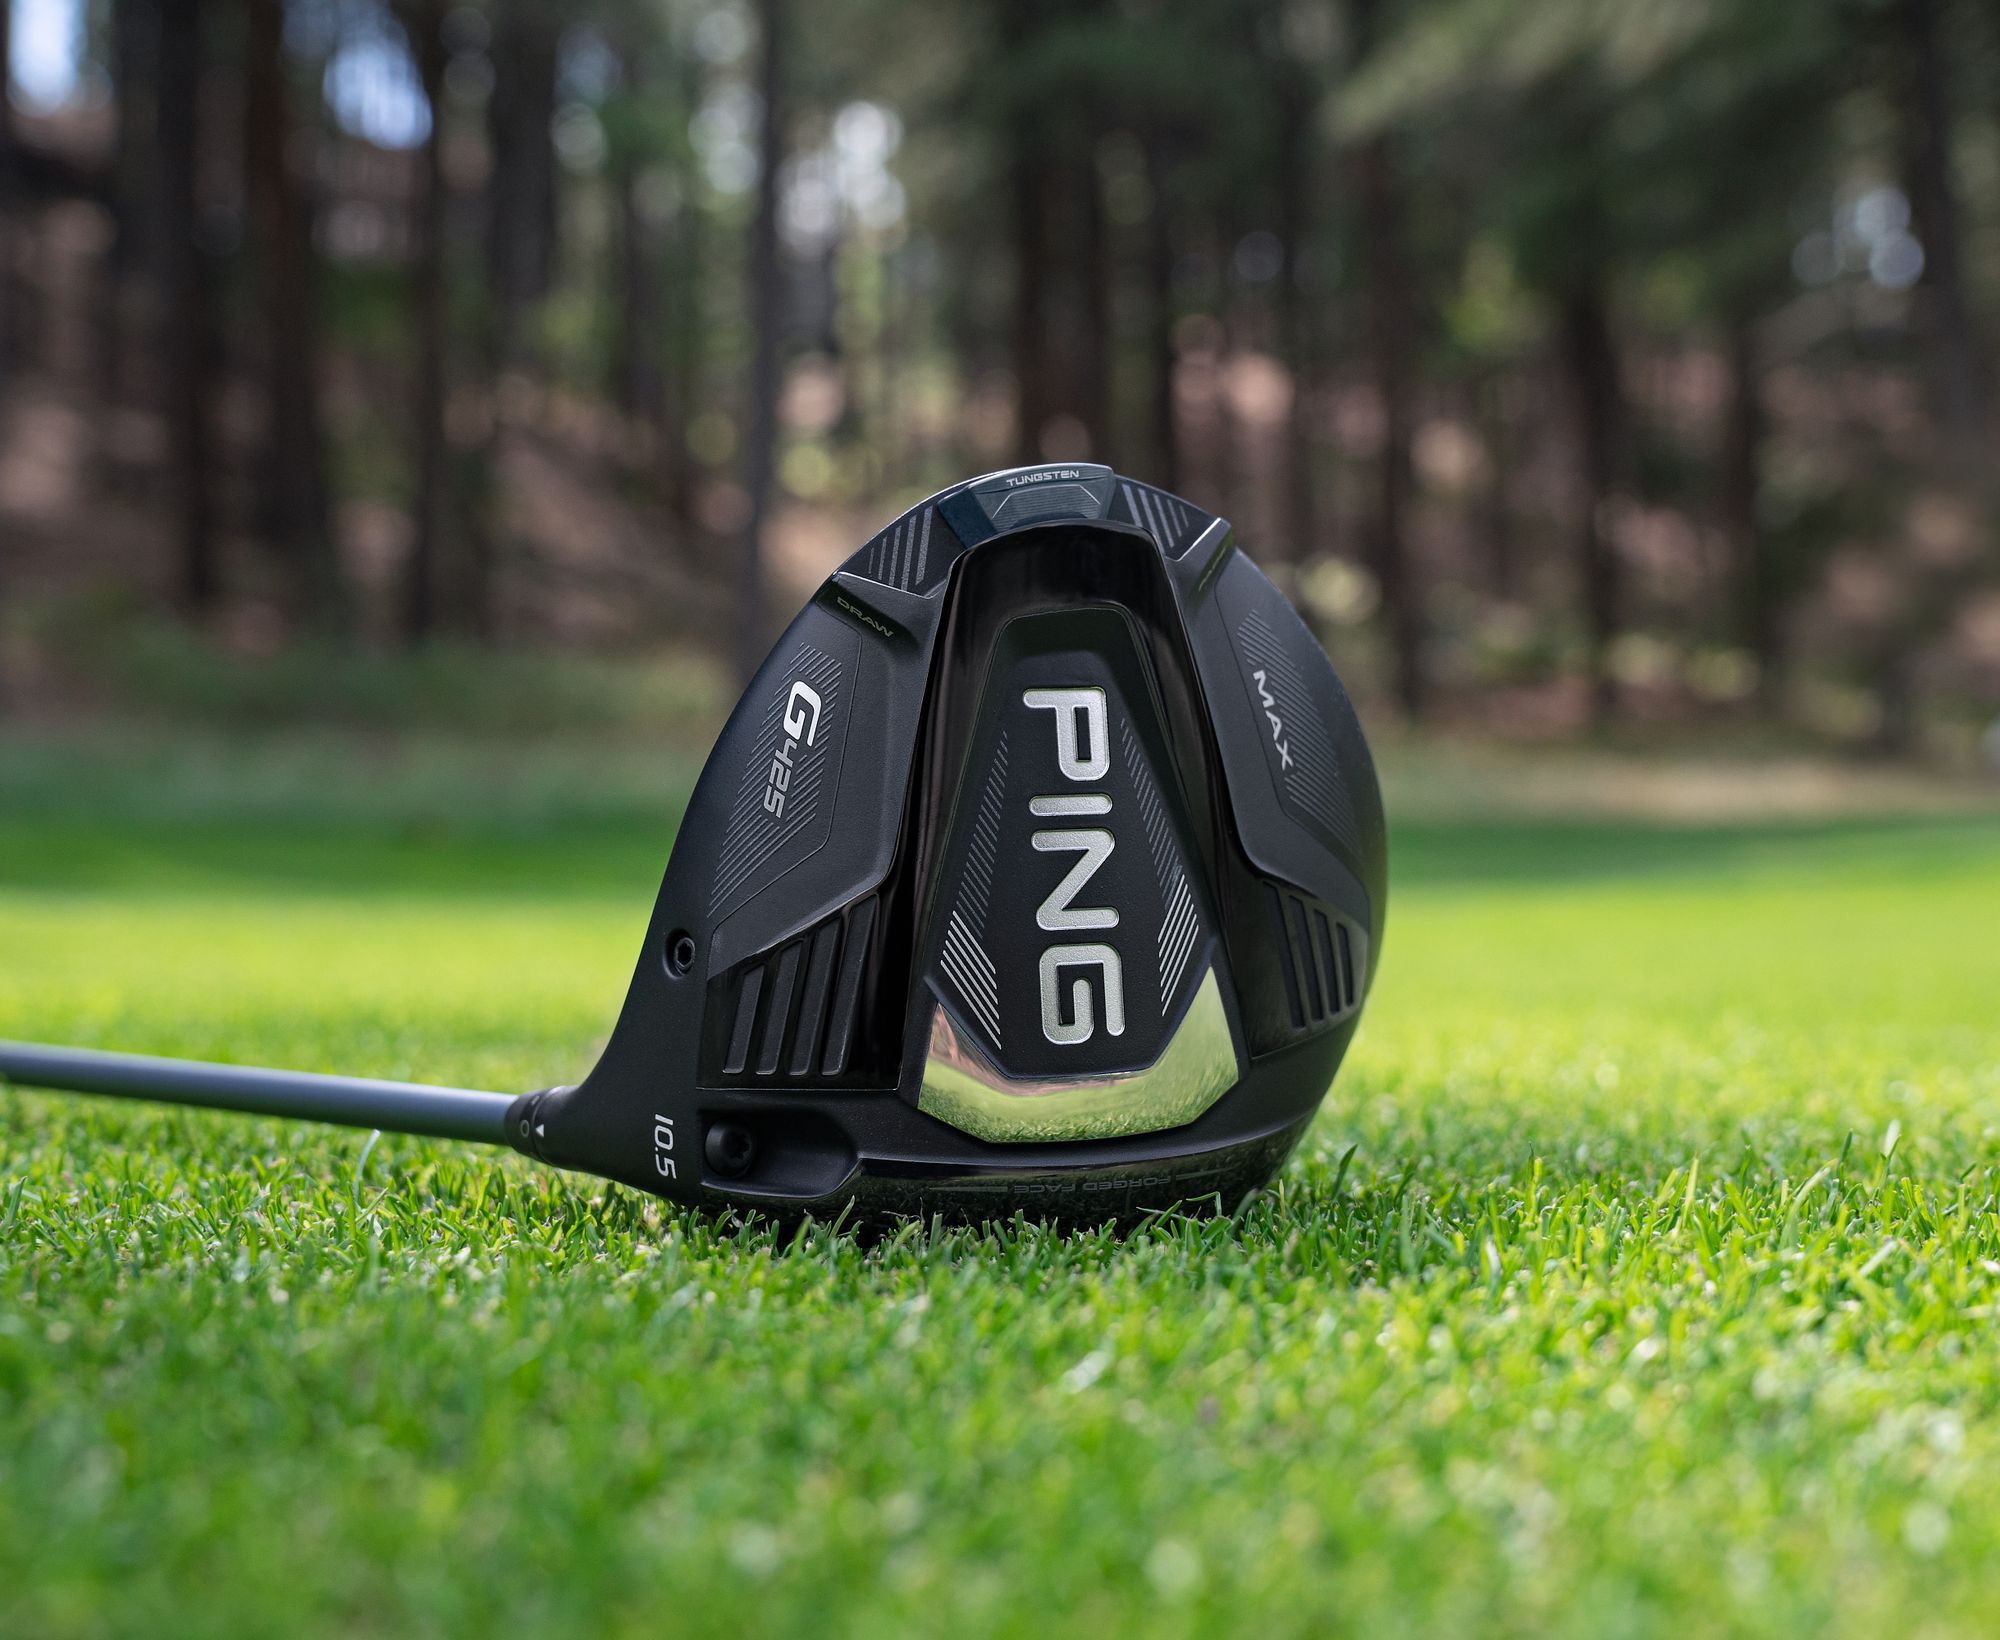 PING G425 Driver launched in 2022